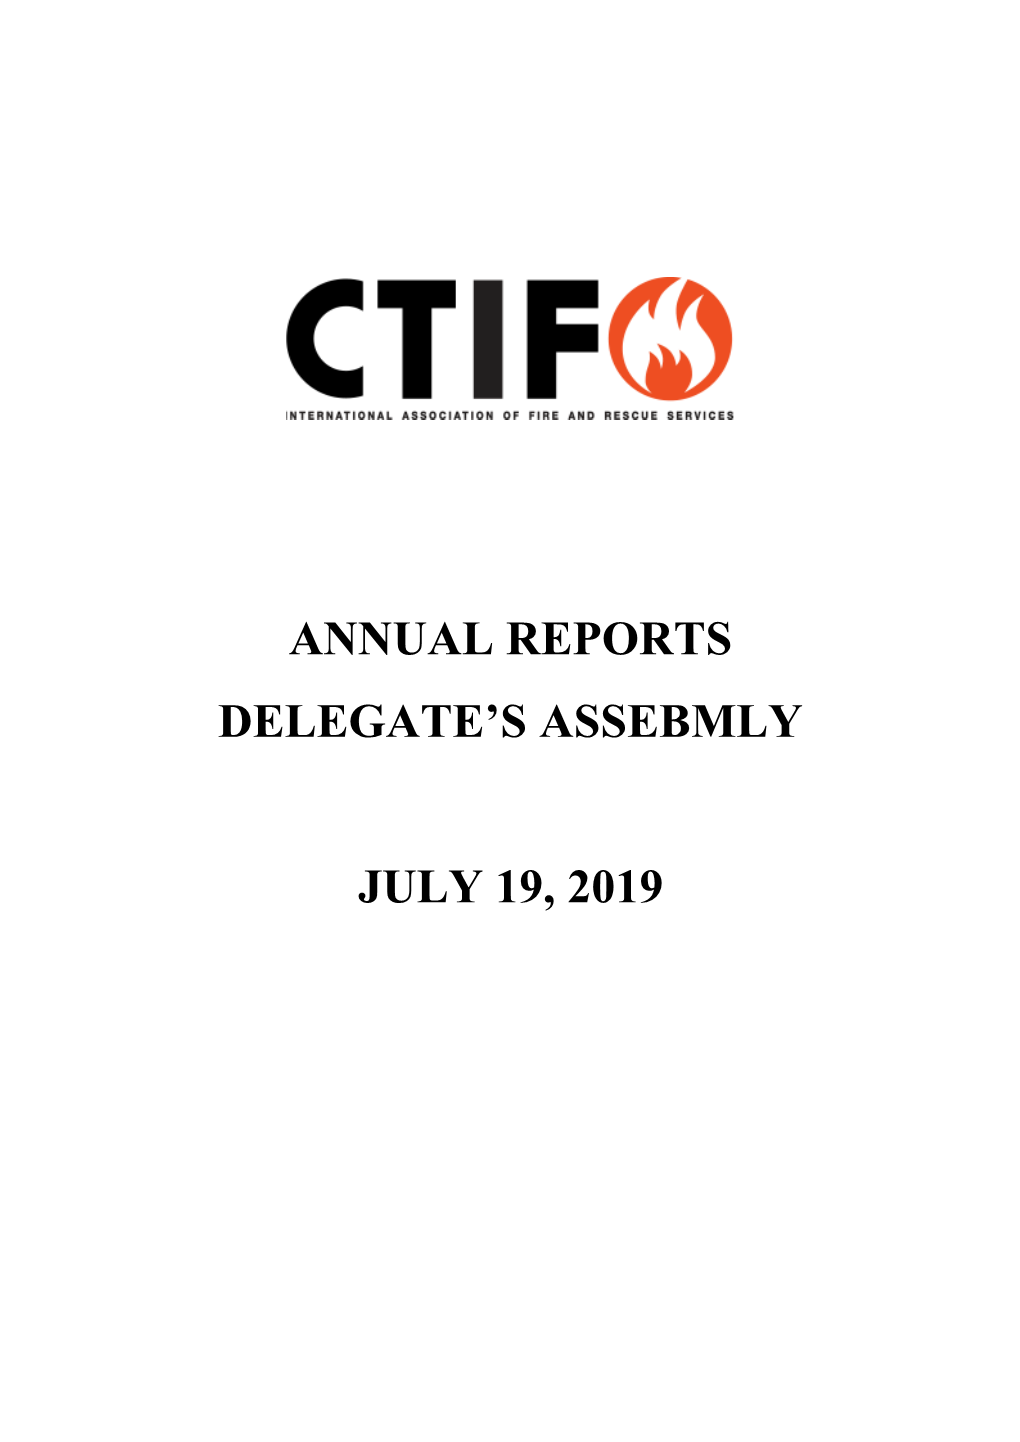 Annual Reports Delegate's Assebmly July 19, 2019